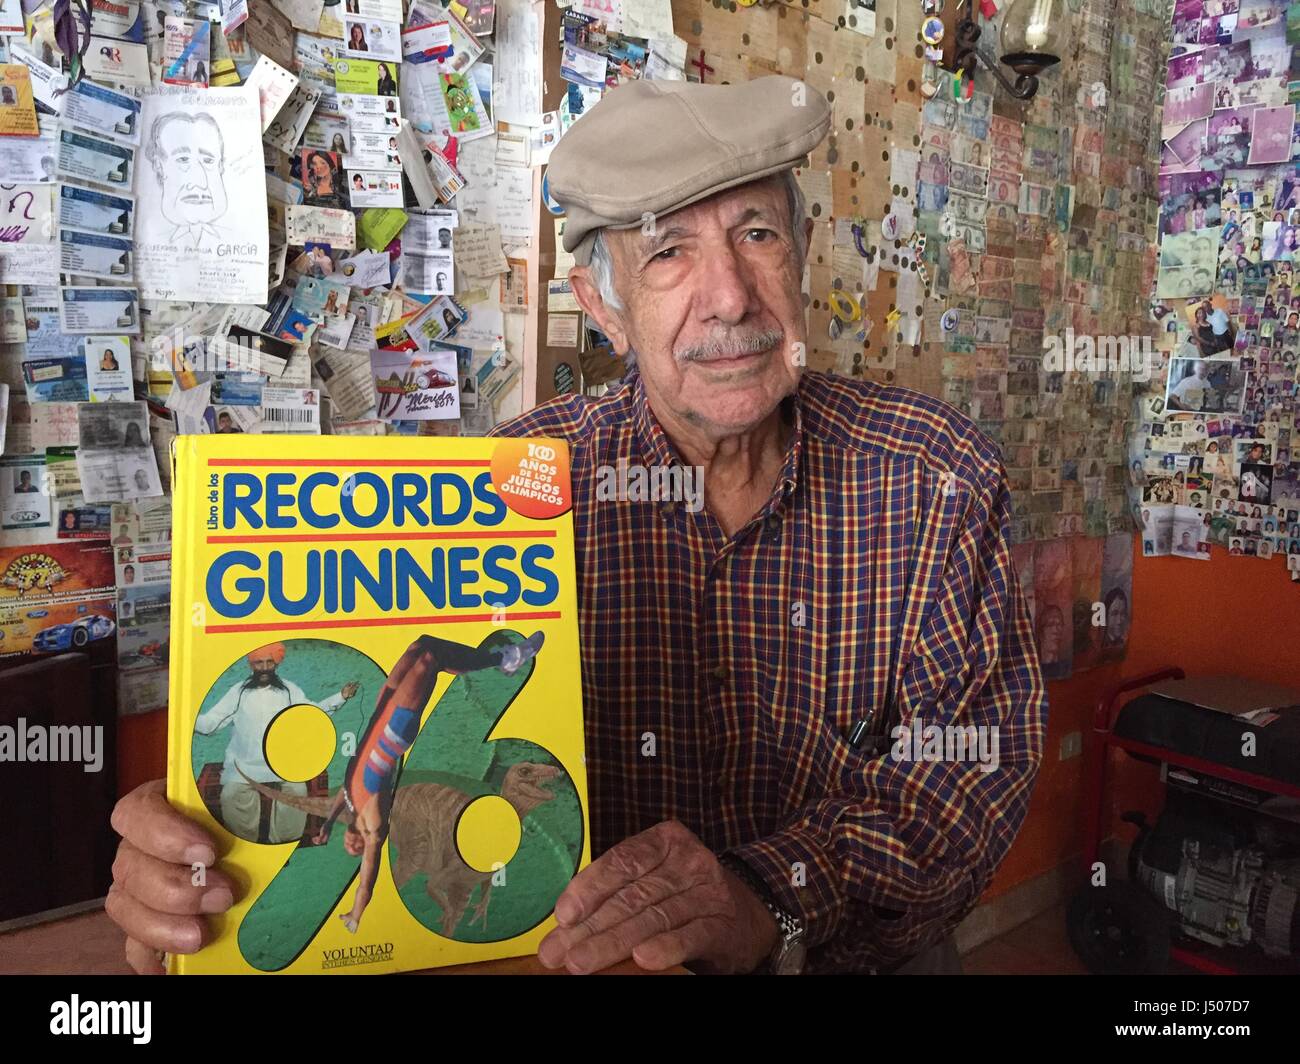 Merida, Venezuela. 6th Apr, 2017. Ice cream shop owner Manuel da Silva Oliveira holds up a Guiness Book of Records from 1996, in which he is mentioned for selling 593 types of ice cream at his shop in Merida, Venezuela, 6 April 2017. Today, he sells roughly 870 types of ice cream and holds the world record. Photo: Georg Ismar/dpa/Alamy Live News Stock Photo